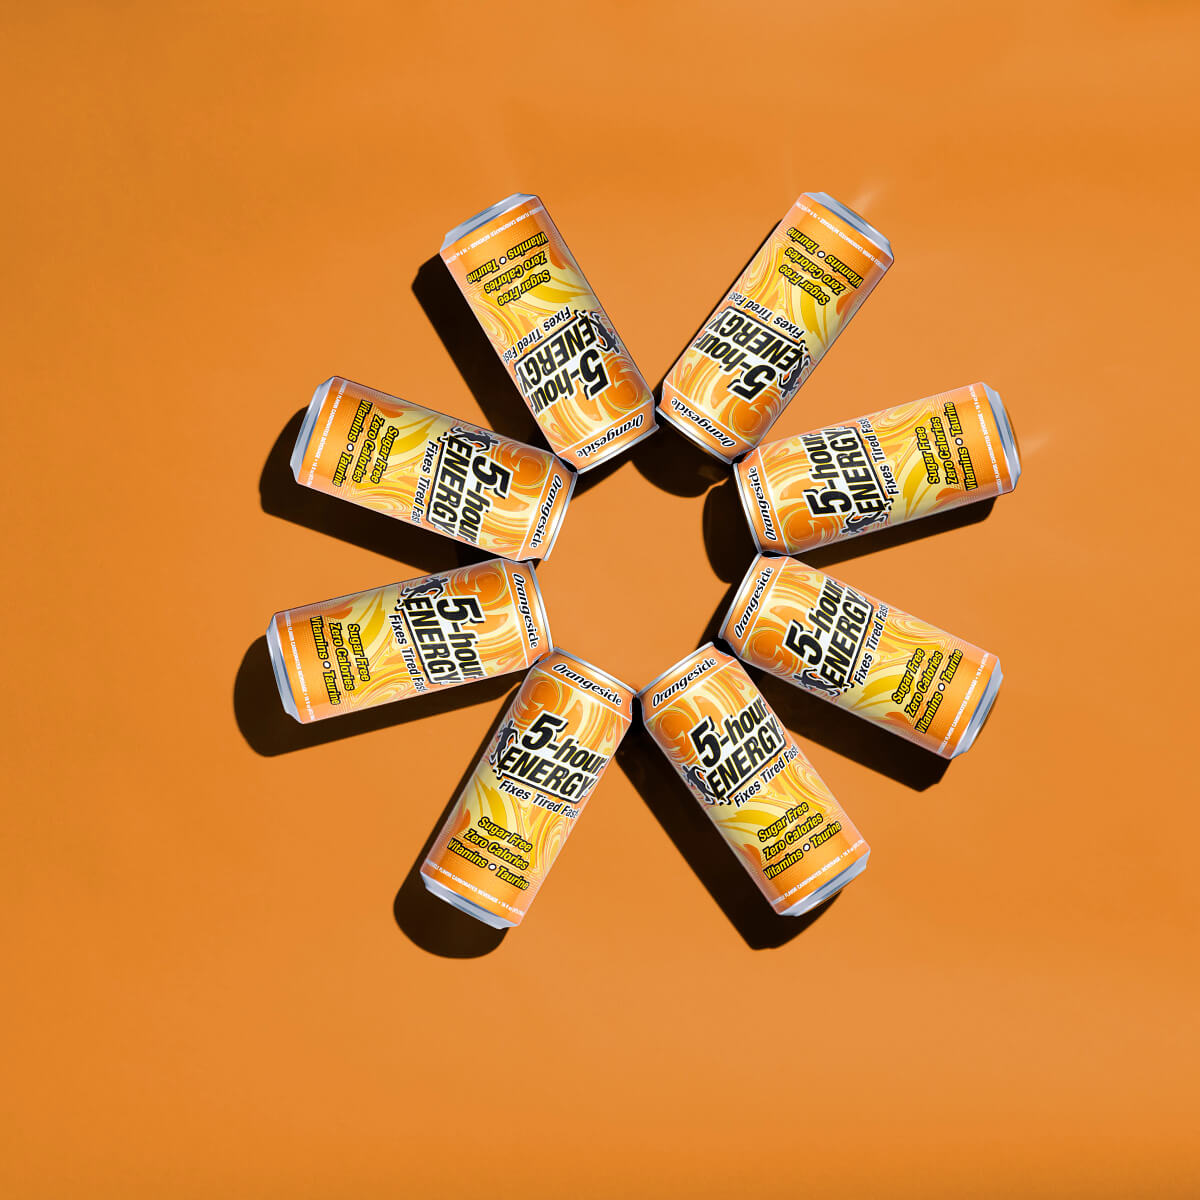 8 cans of 5-hour ENERGY Orangesicle in the shape of a circle